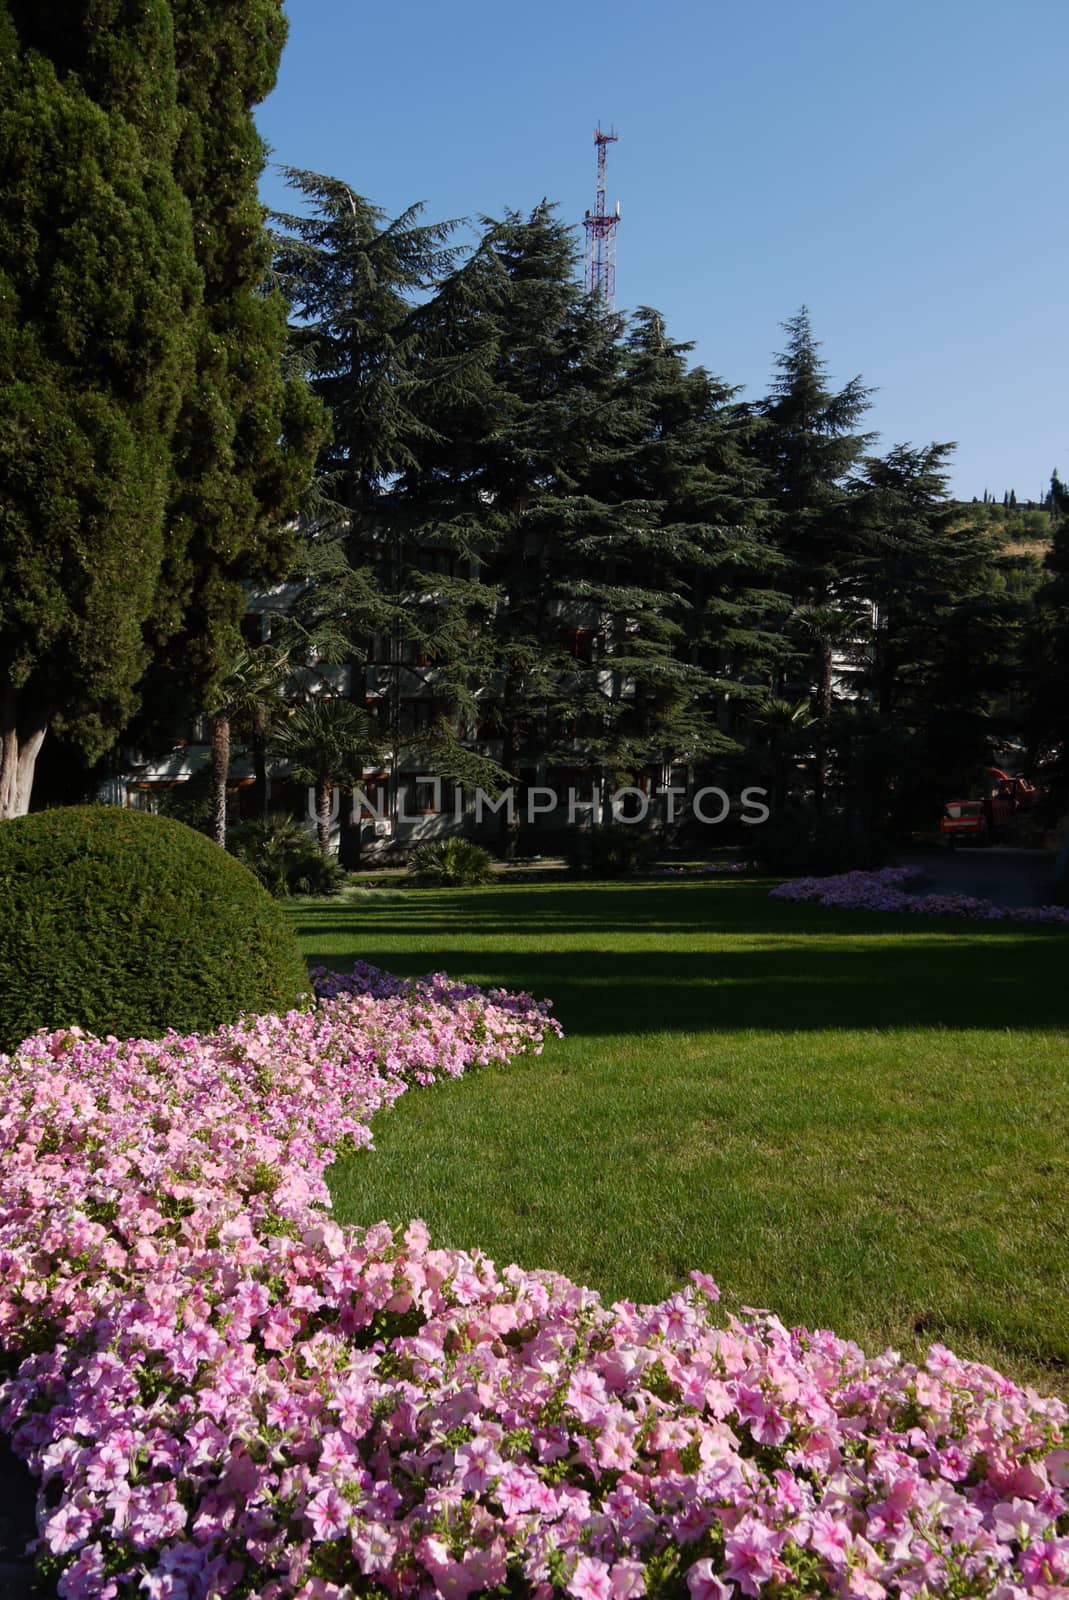 A flower bed with small pink flowers near a smoothly cut lawn against a background of decorative artisans and tall trees